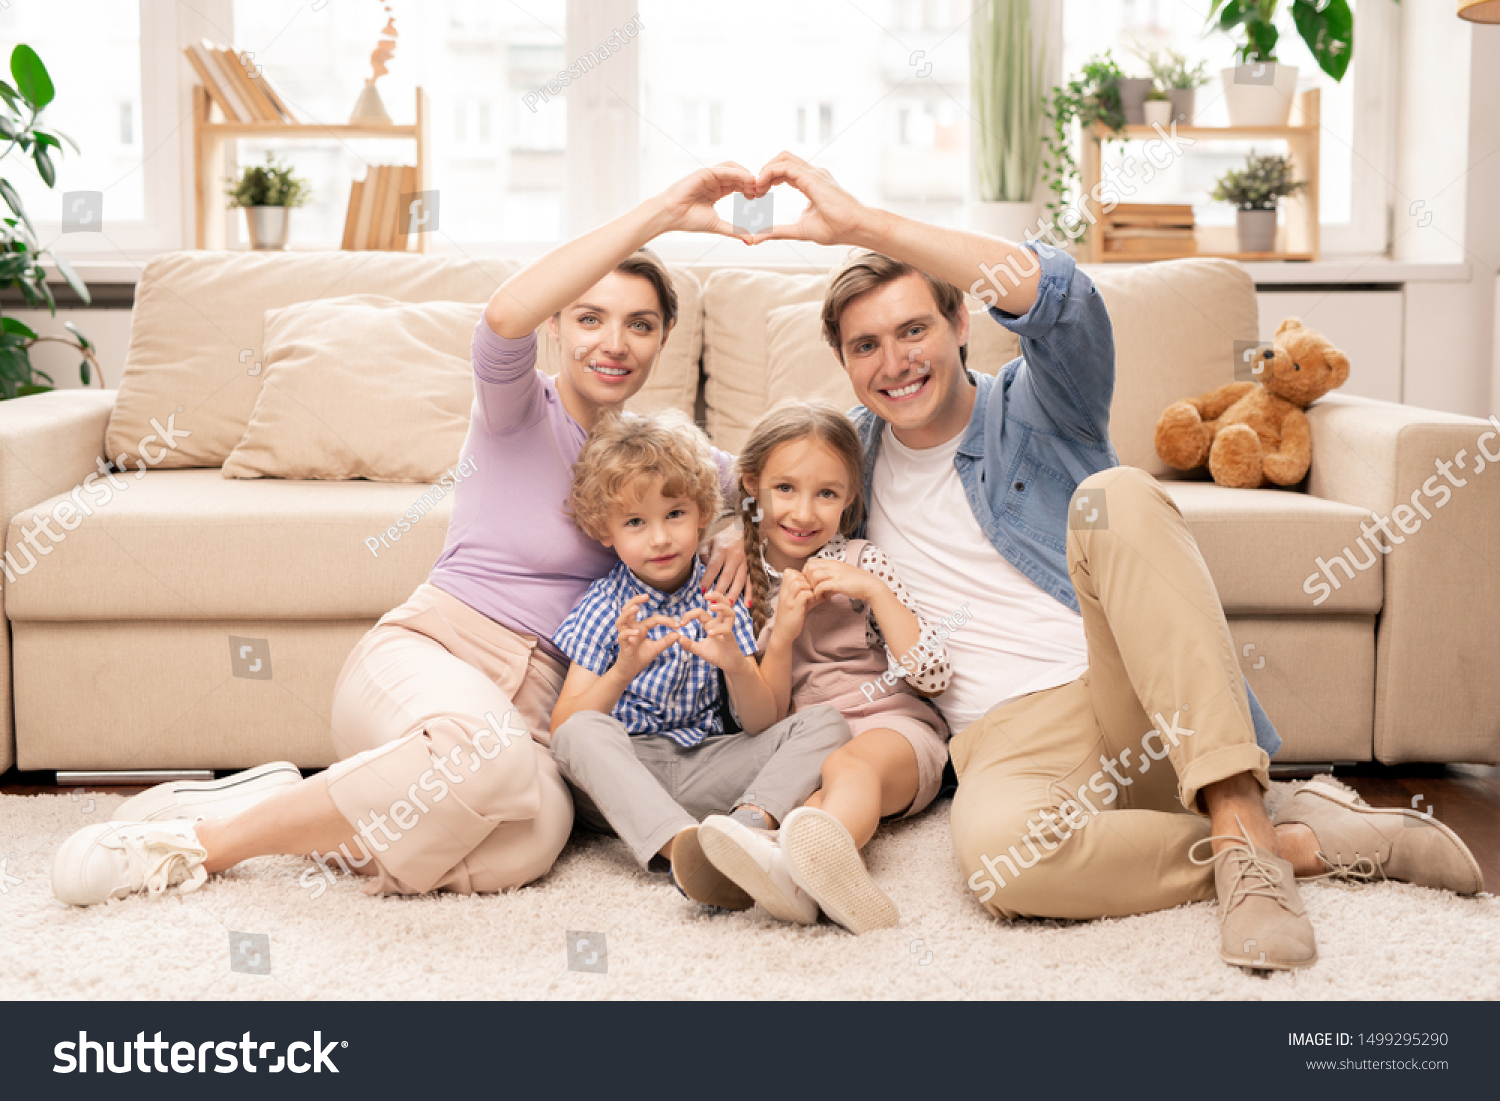 Happy parents and two adorable siblings sitting on the floor by couch in front of camera and making heart shape with fingers #1499295290